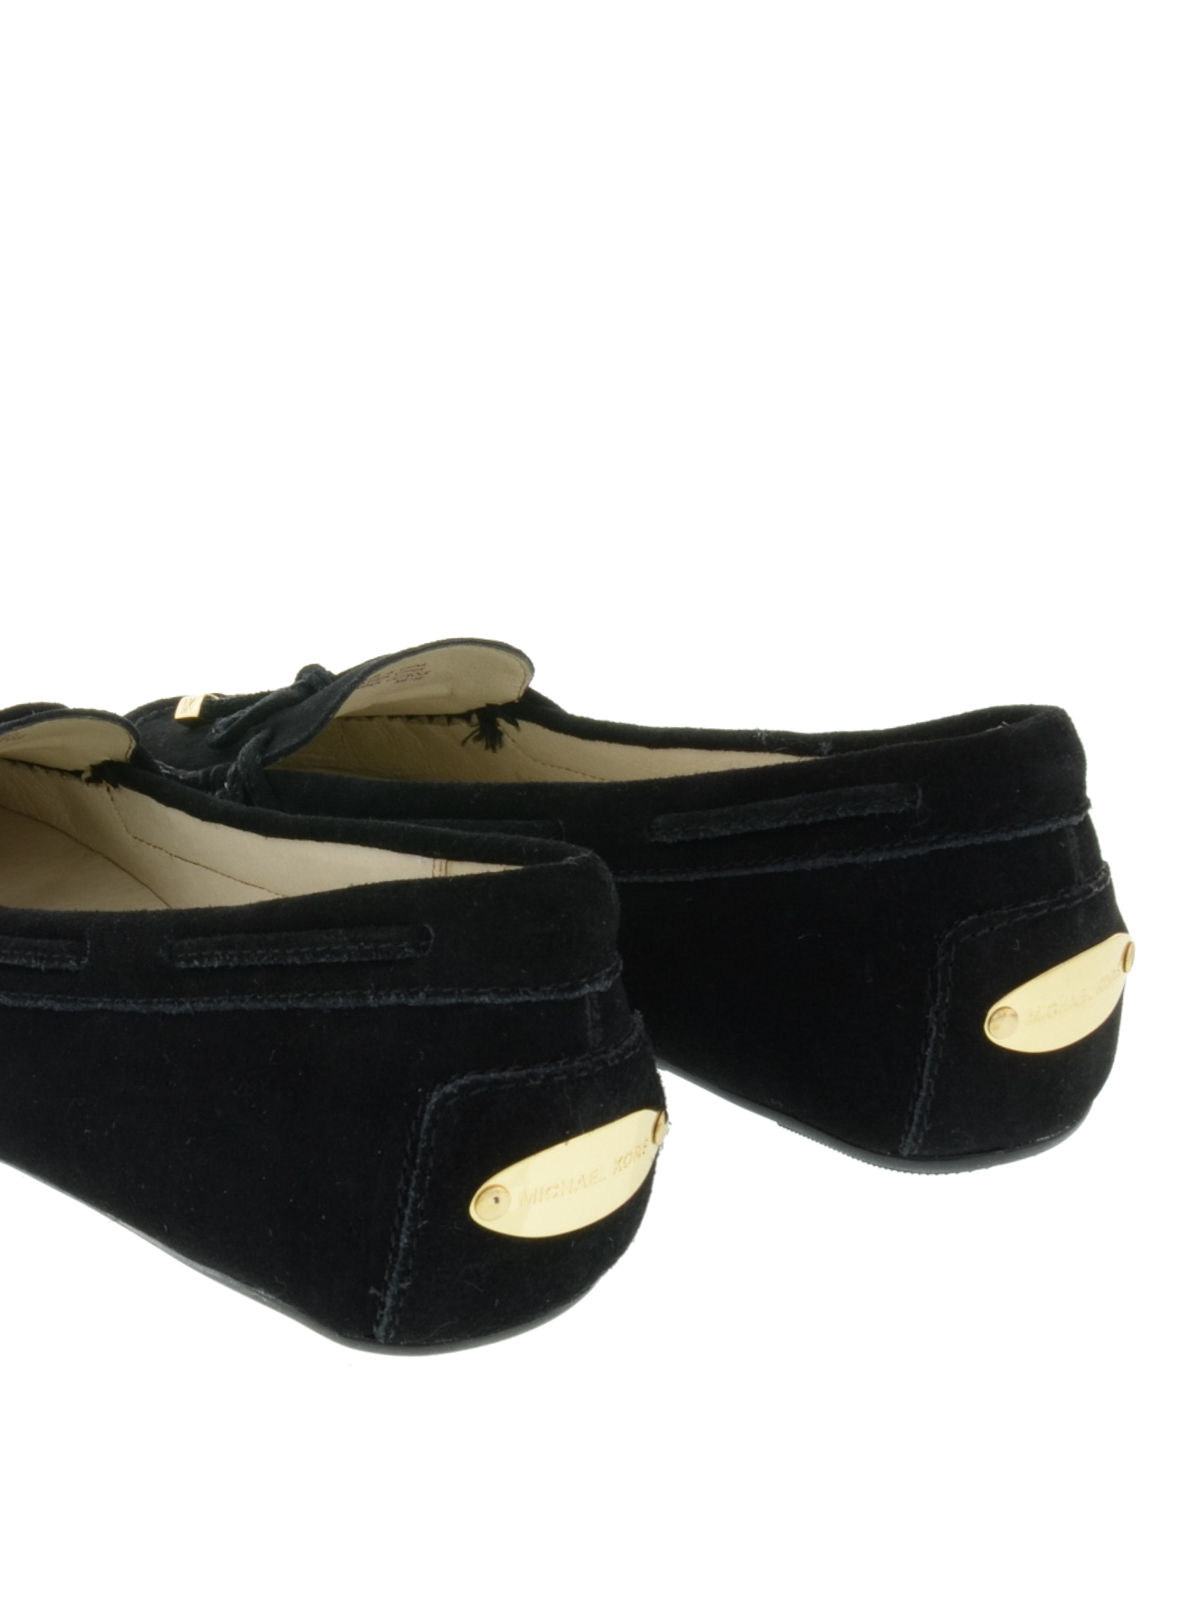 Loafers & Slippers Michael Kors - Daisy suede loafers - 40S4DAFR1S001